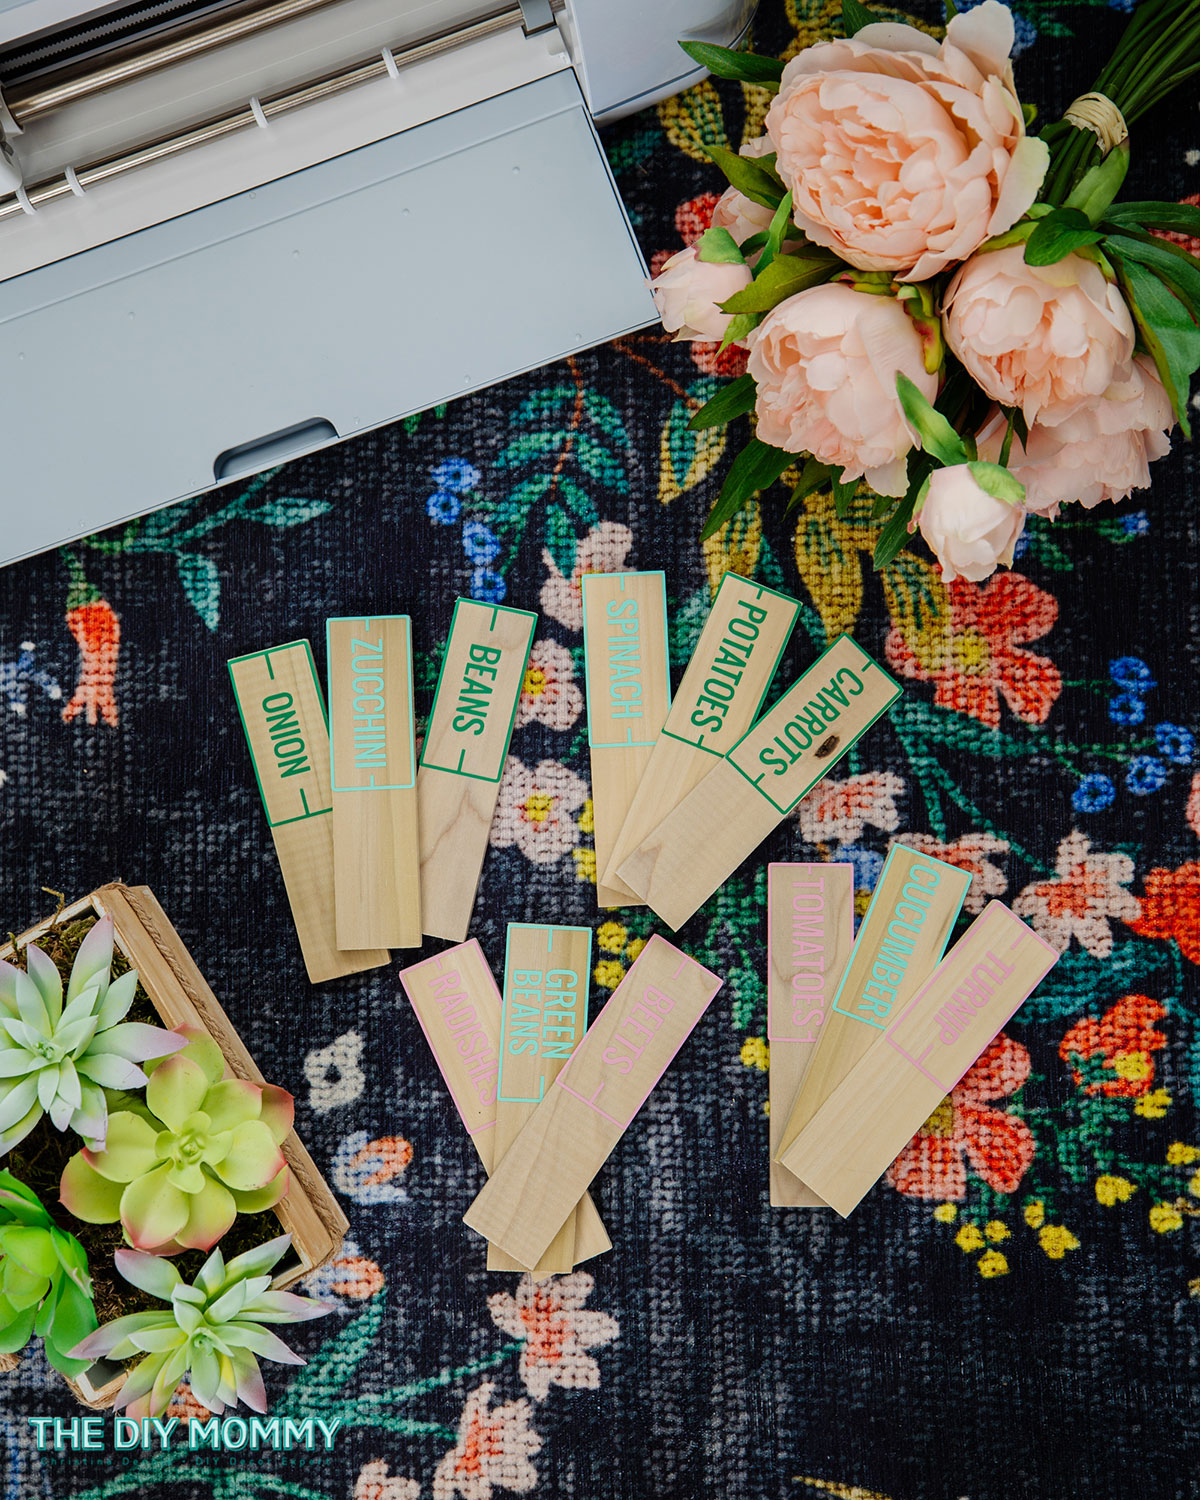 Seed markers are created using small wooden stakes and vinyl. These gardening gifts can easily be personalized with your favorite vegetable seeds.